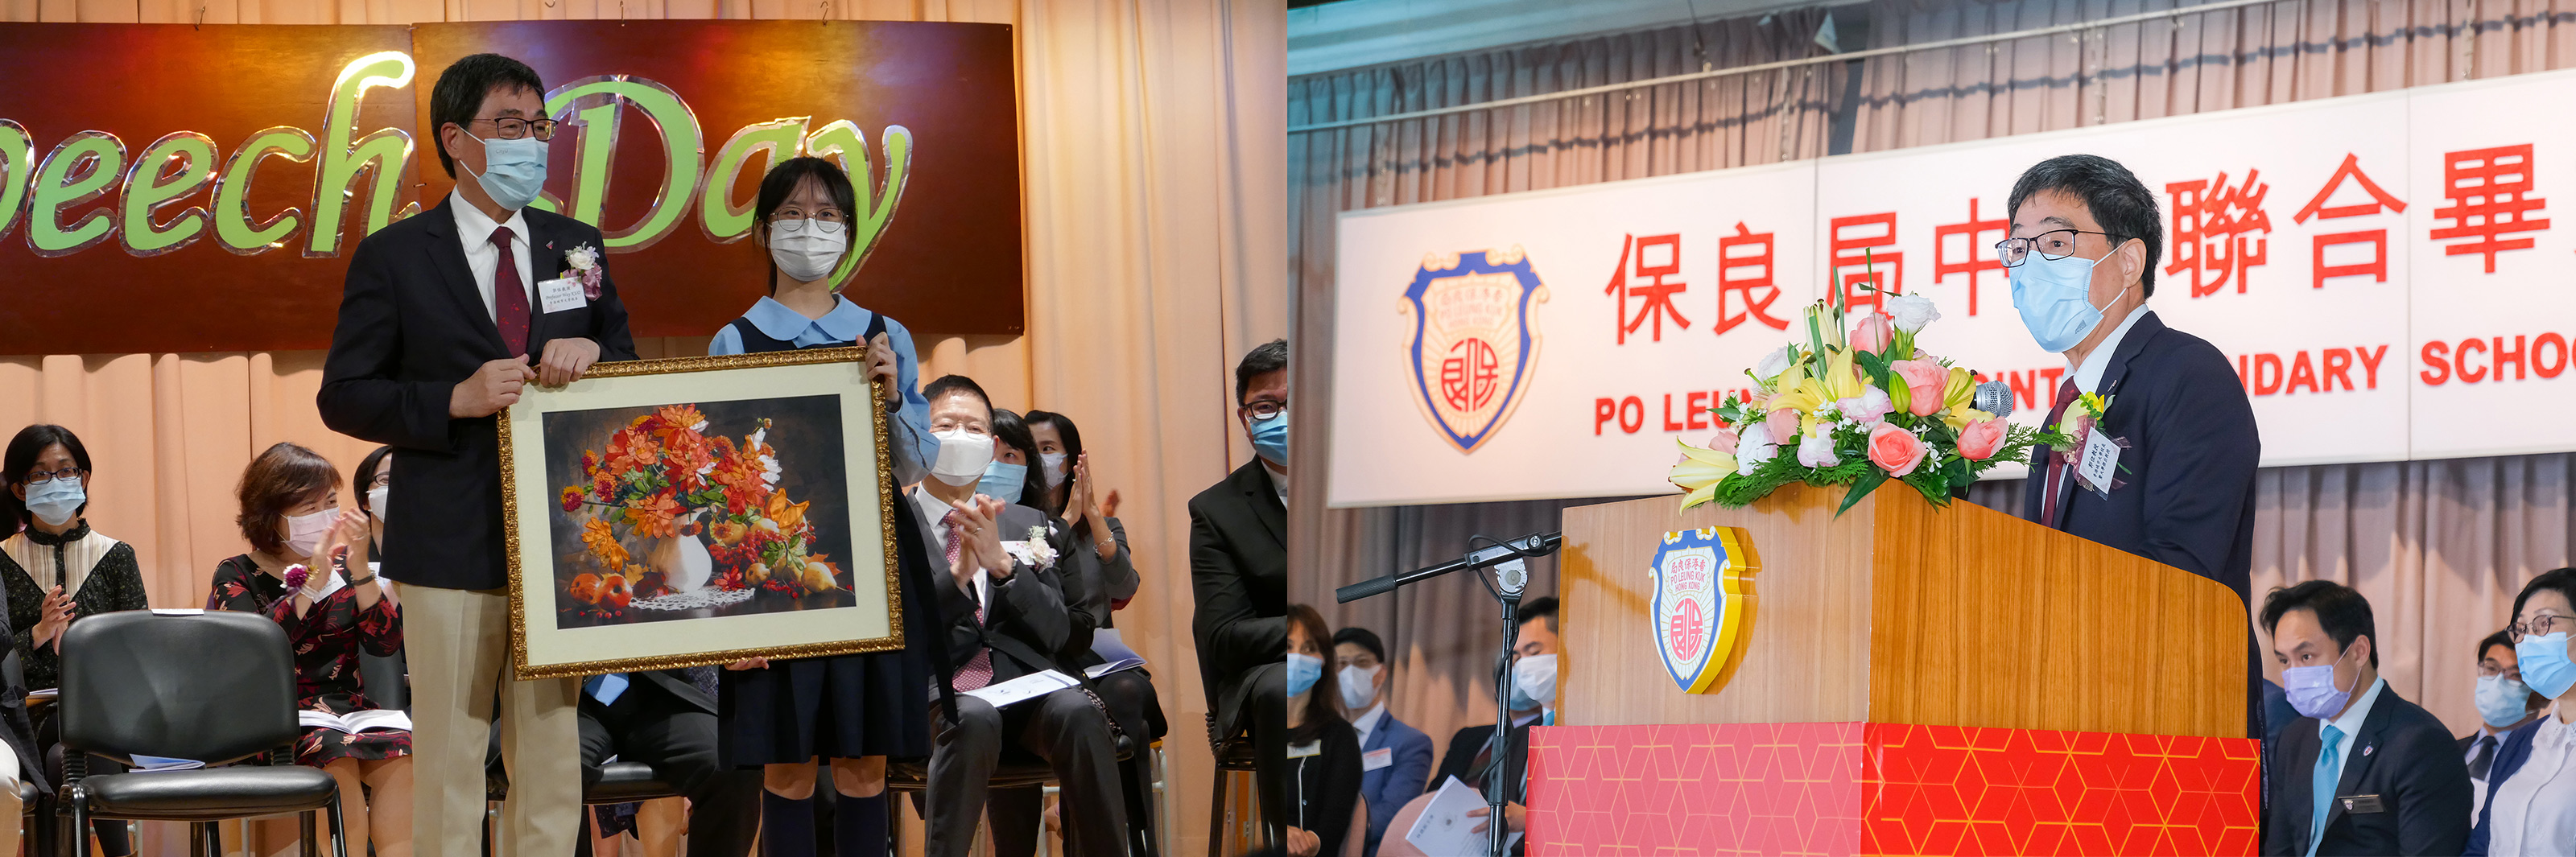 President Kuo receives a souvenir from the student representative of St Catharine’s School for Girls (left) and speaks at Po Leung Kuk Joint Secondary Schools Speech Day (right).